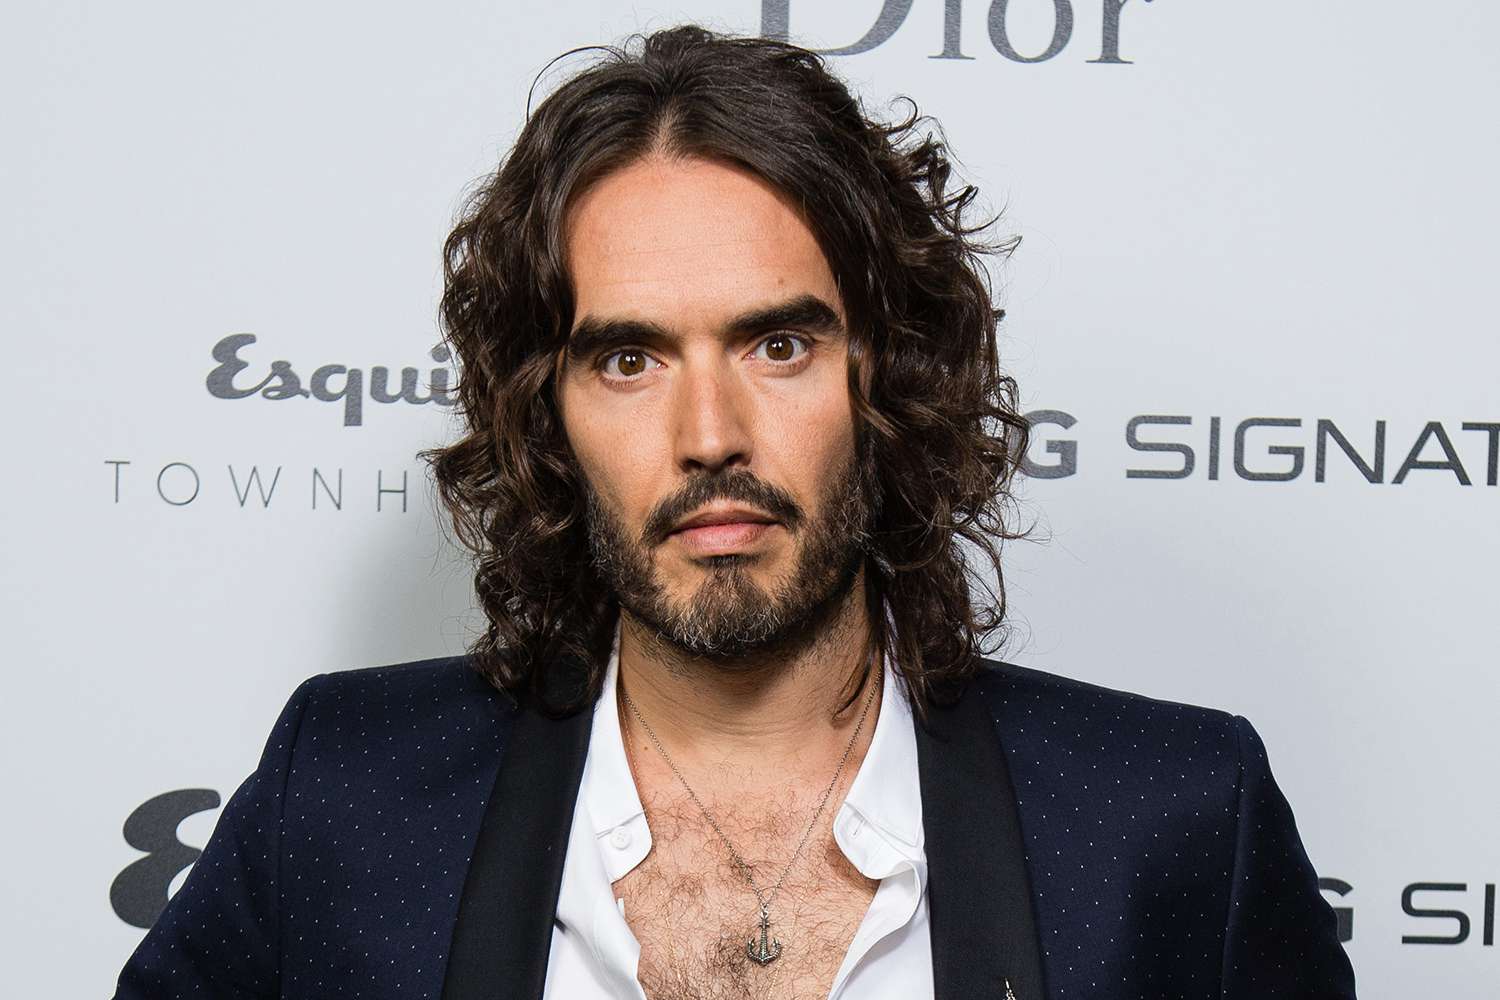 Russell Brand Responds To Alleged Sexual Assault Accusations On ‘Arthur’ Movie Set